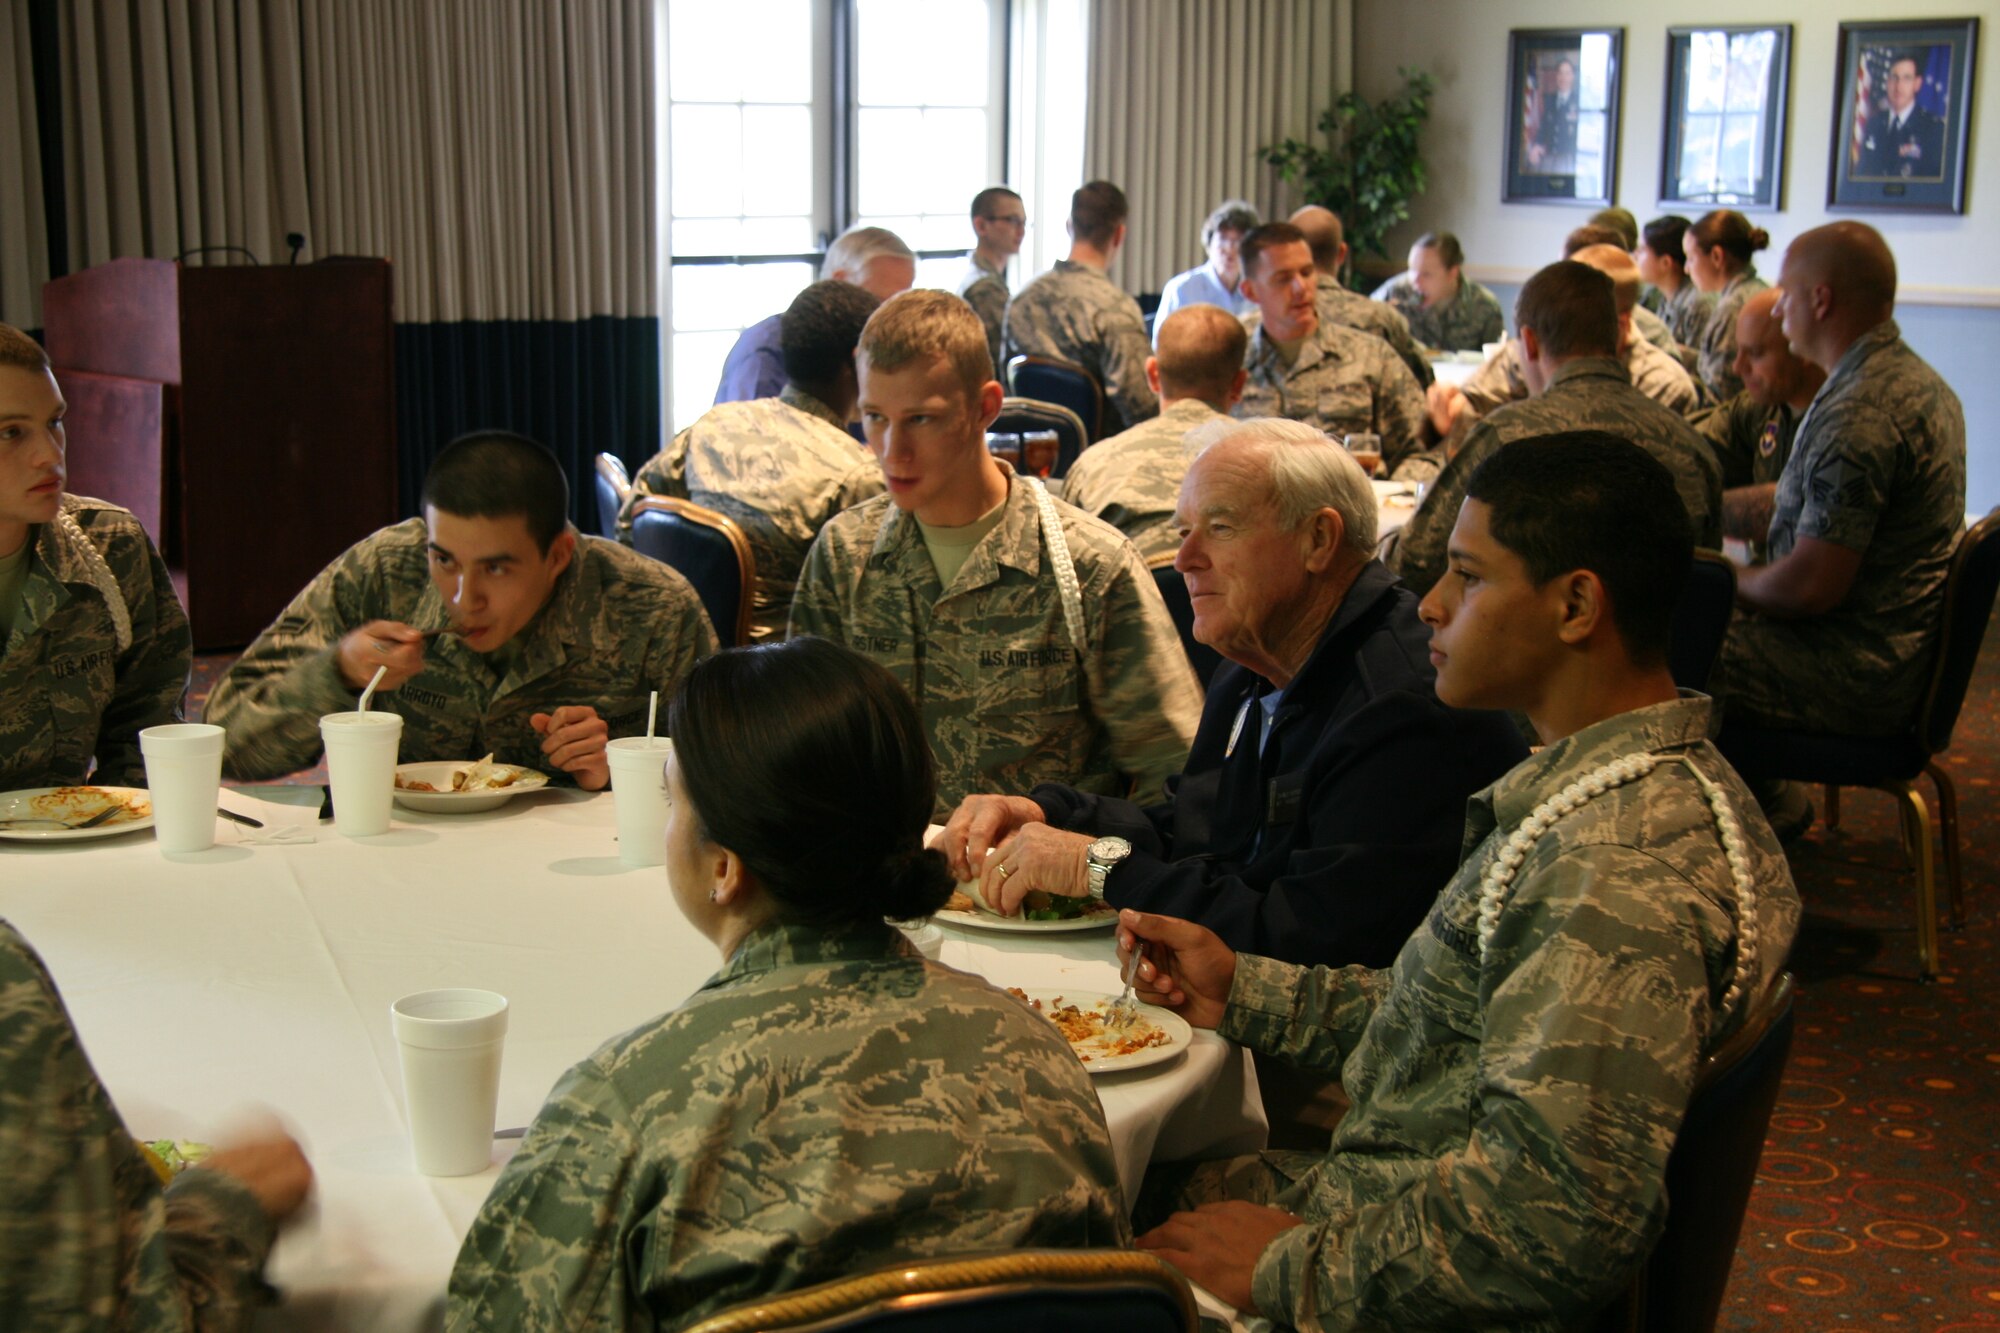 Retired Col. Charlie Simpson, Association of Air Force Missileers executive director,
mentors and develops 532nd Training Squadron Airmen during an inter-generational professional development exchange Jan. 22 in the Pacific Coast Club's Warrior room here. (Courtesy photo)